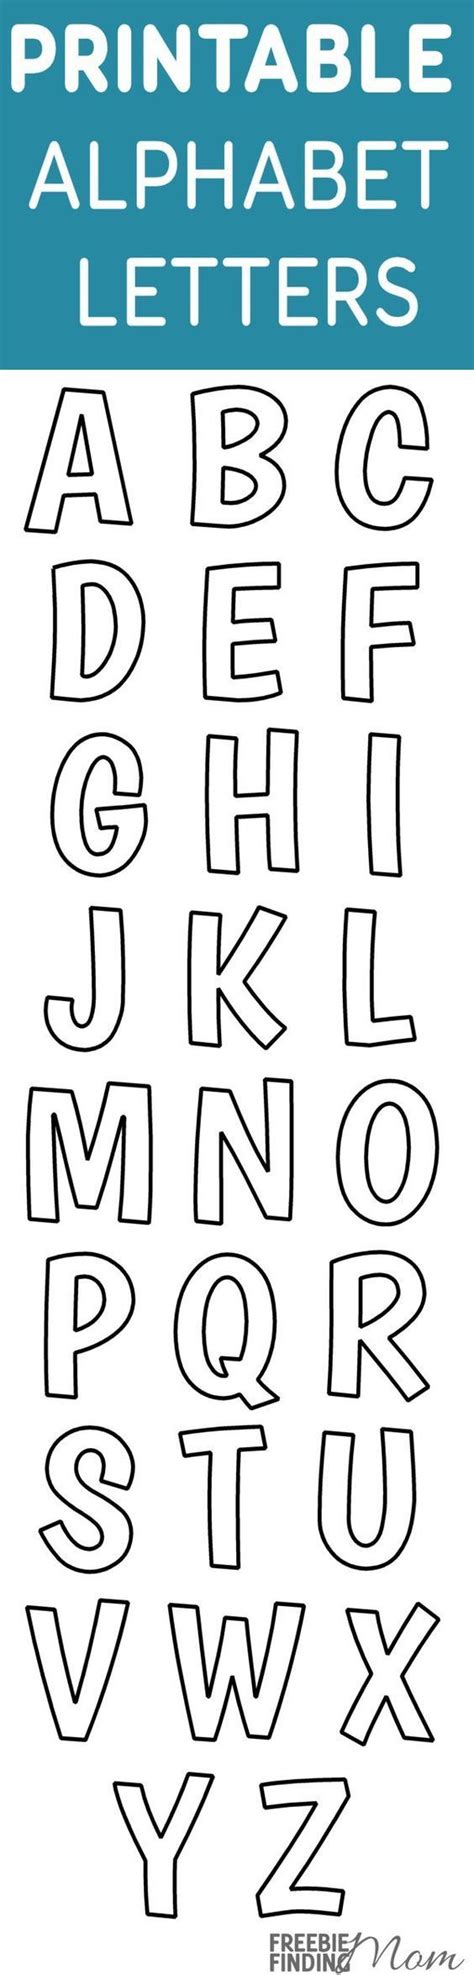 Template Alphabet Letters The Best Part Is All Of Our Printable